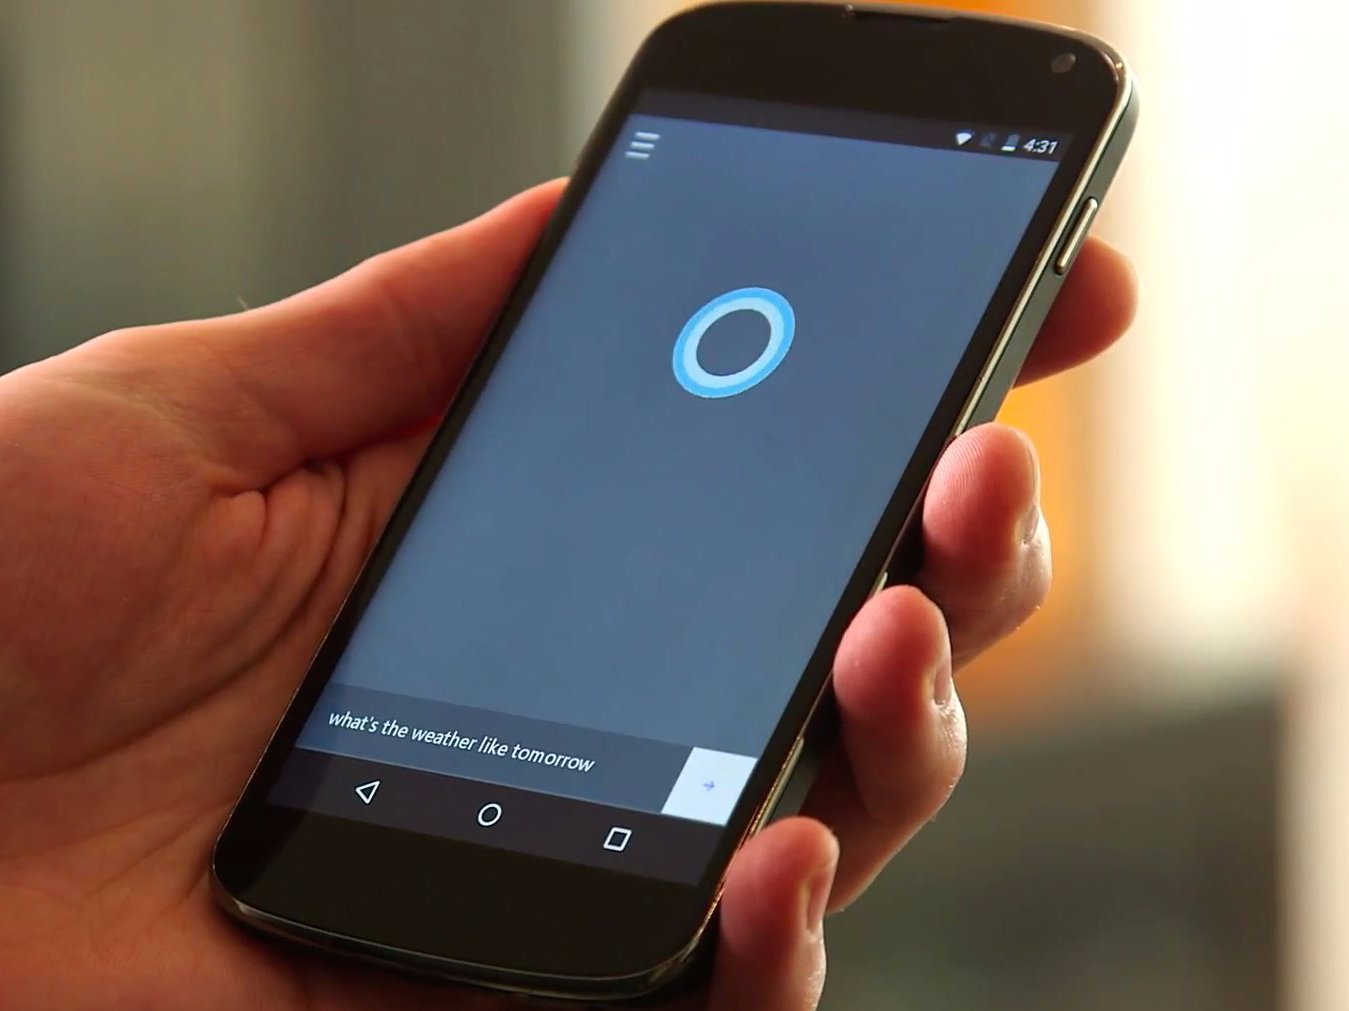 Microsoft Releases Windows 10 App Collection Featuring Cortana